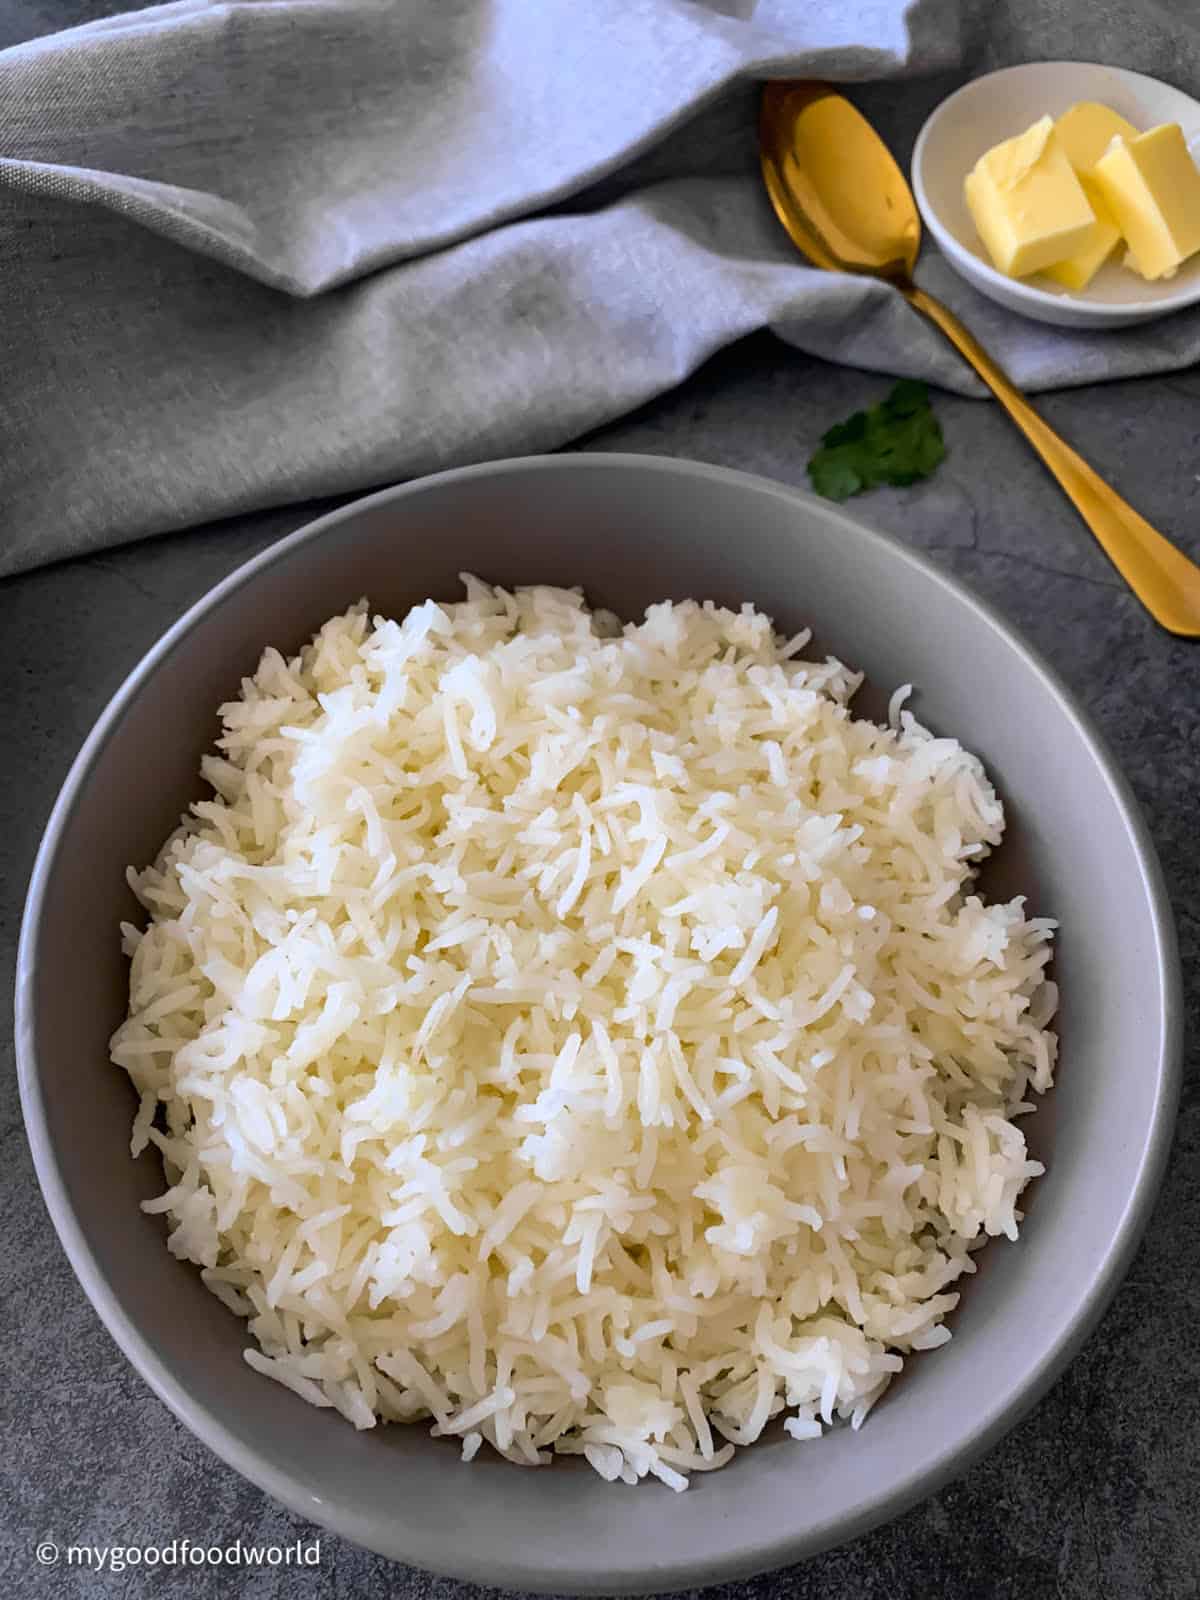 Cooked white Basmati rice is served in a round, grey colored bowl. 